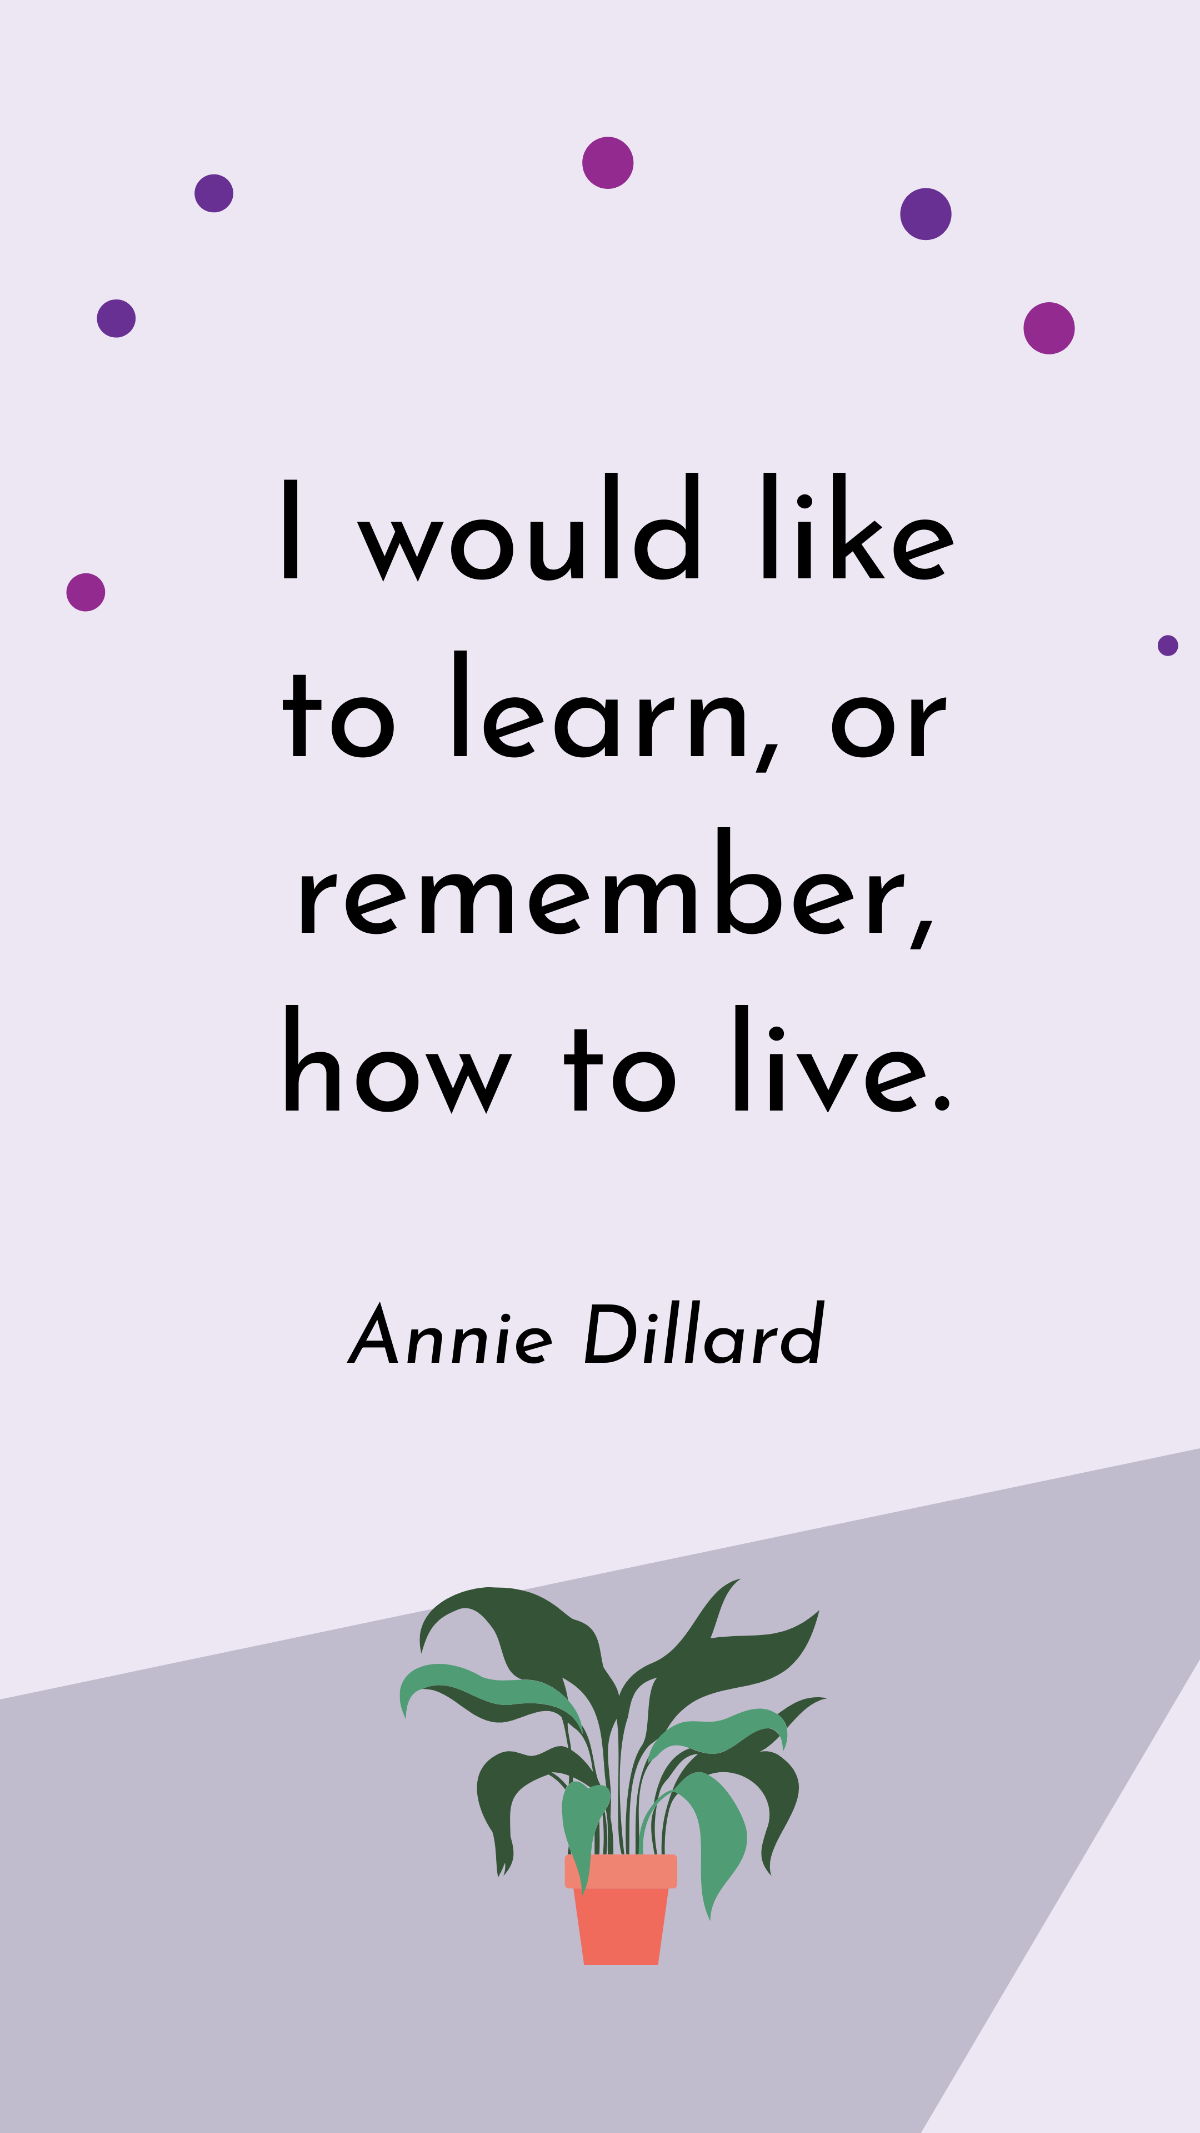 Annie Dillard - I would like to learn, or remember, how to live.